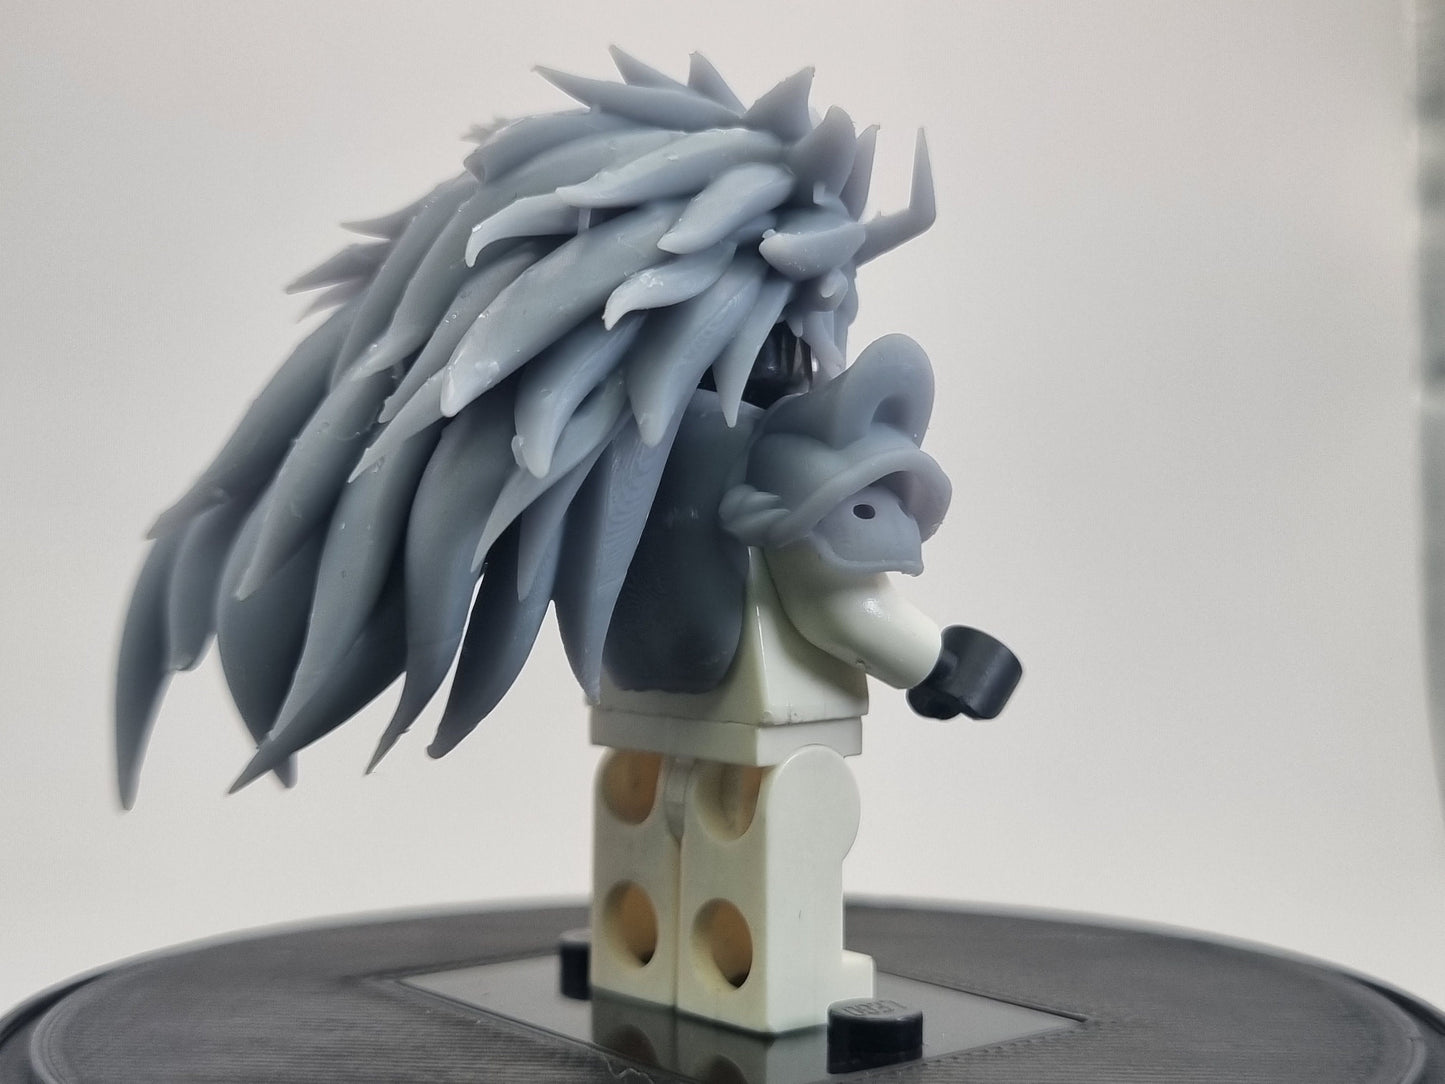 Buidling toy longhaired animal armor!